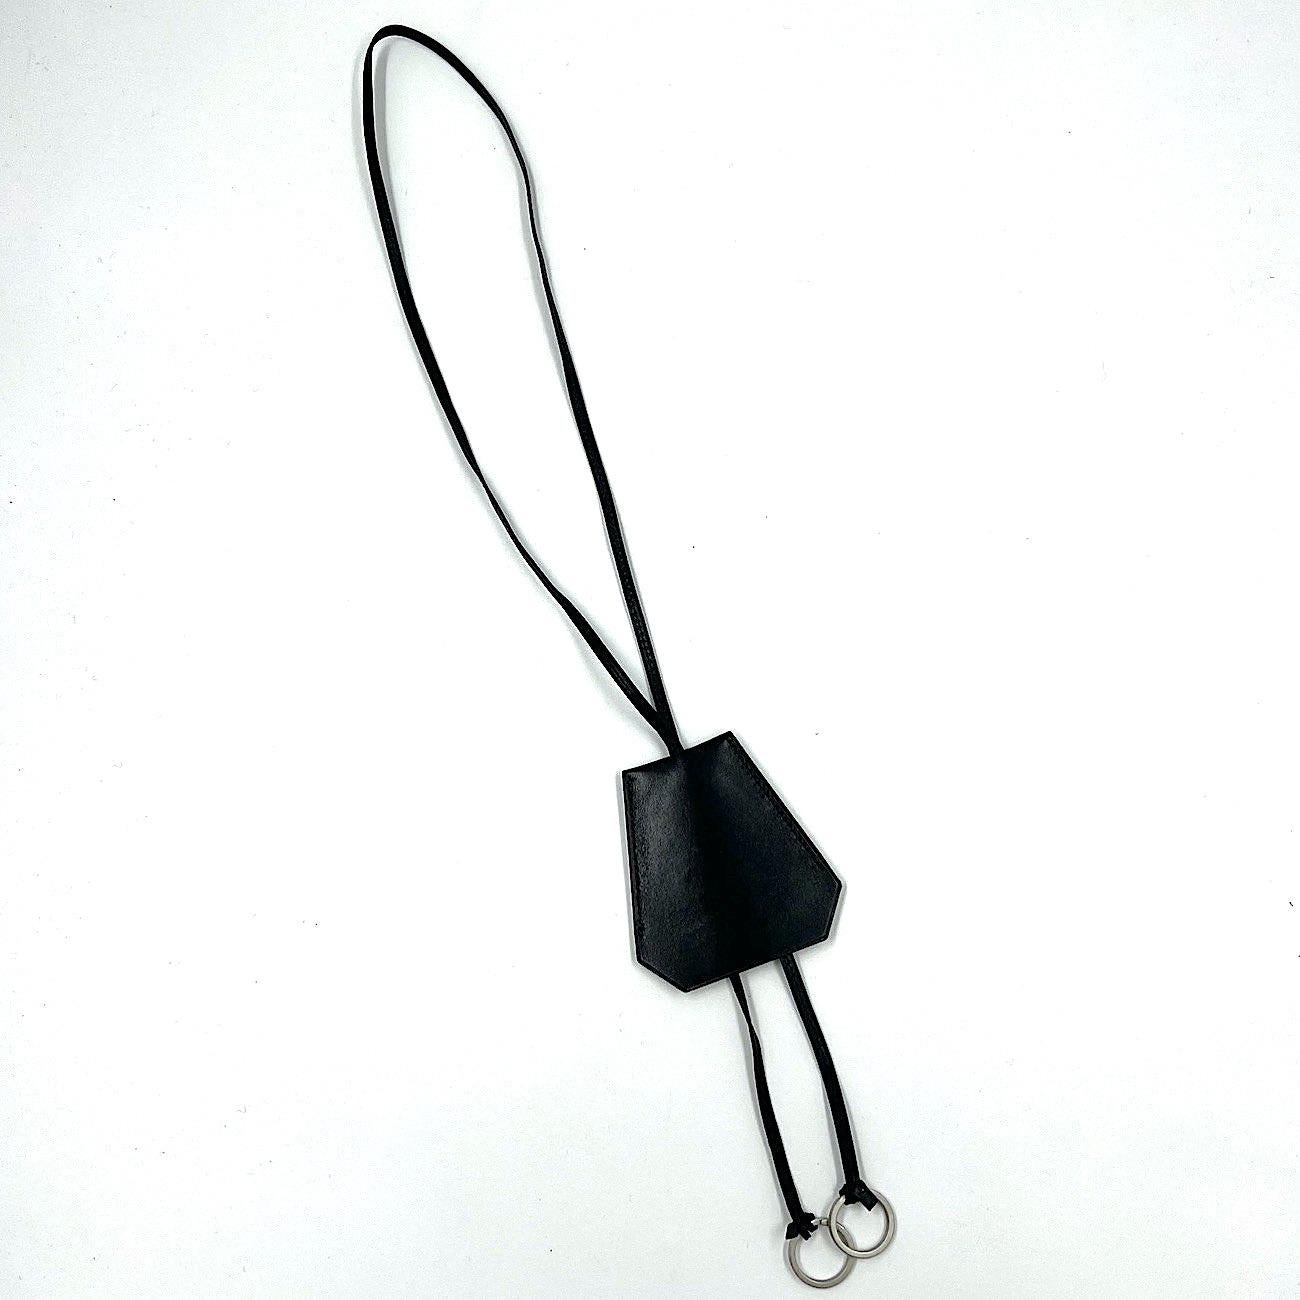 HERMES Le Touquet Key Holder in Black Leather.
In very good condition.
Made in France.
Dimensions : clochette : 8 x 7 cm - leather chain: total length 100 cm

Will be delivered in a non-original dustbag.